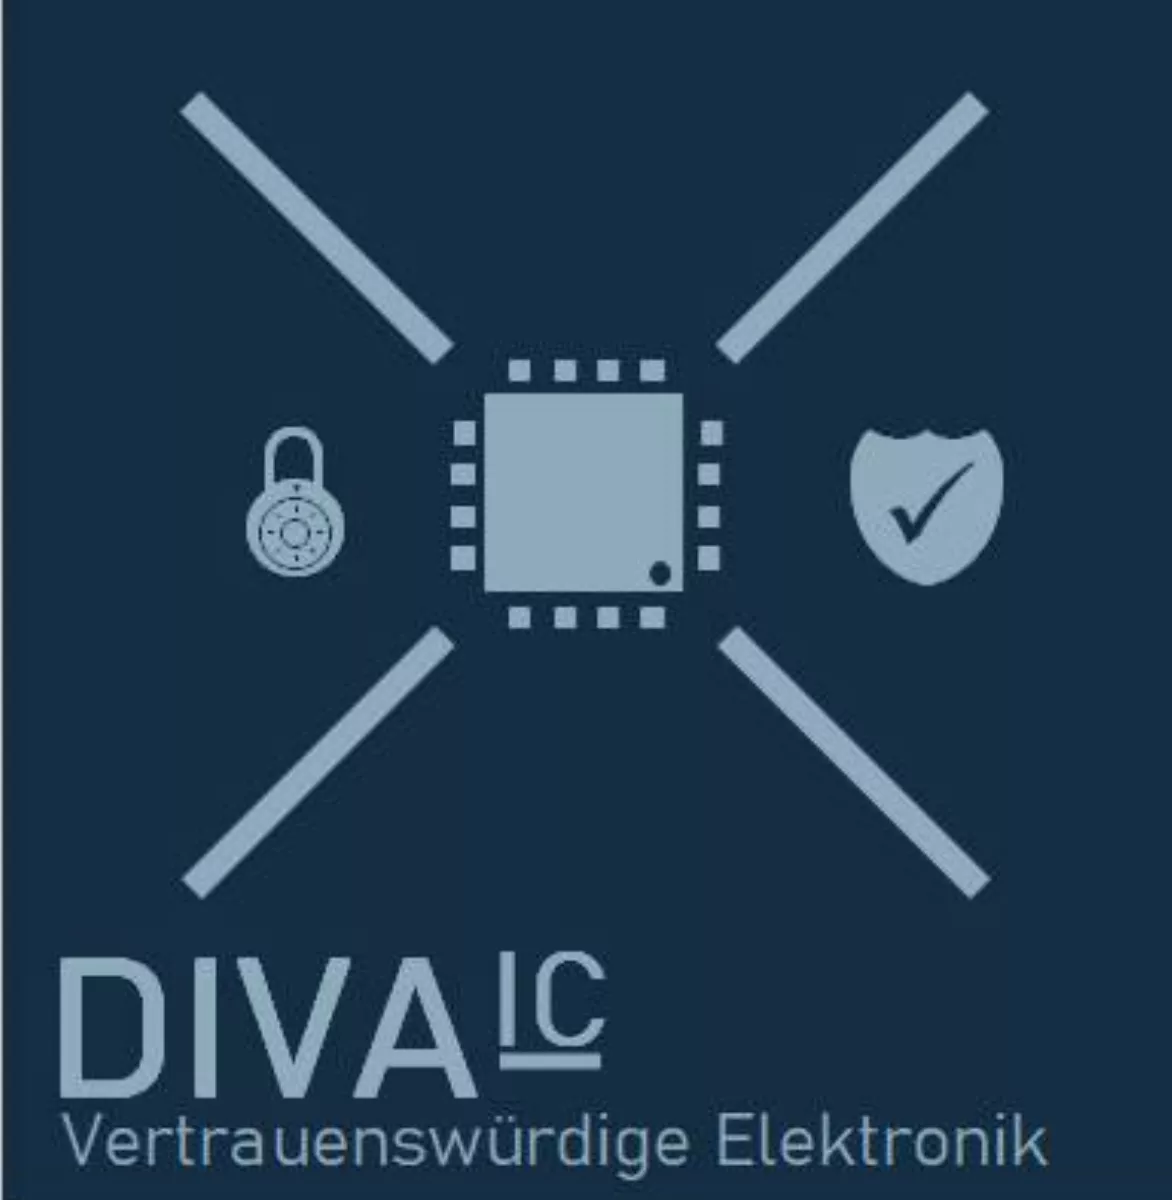 Research project VE-DIVA-IC